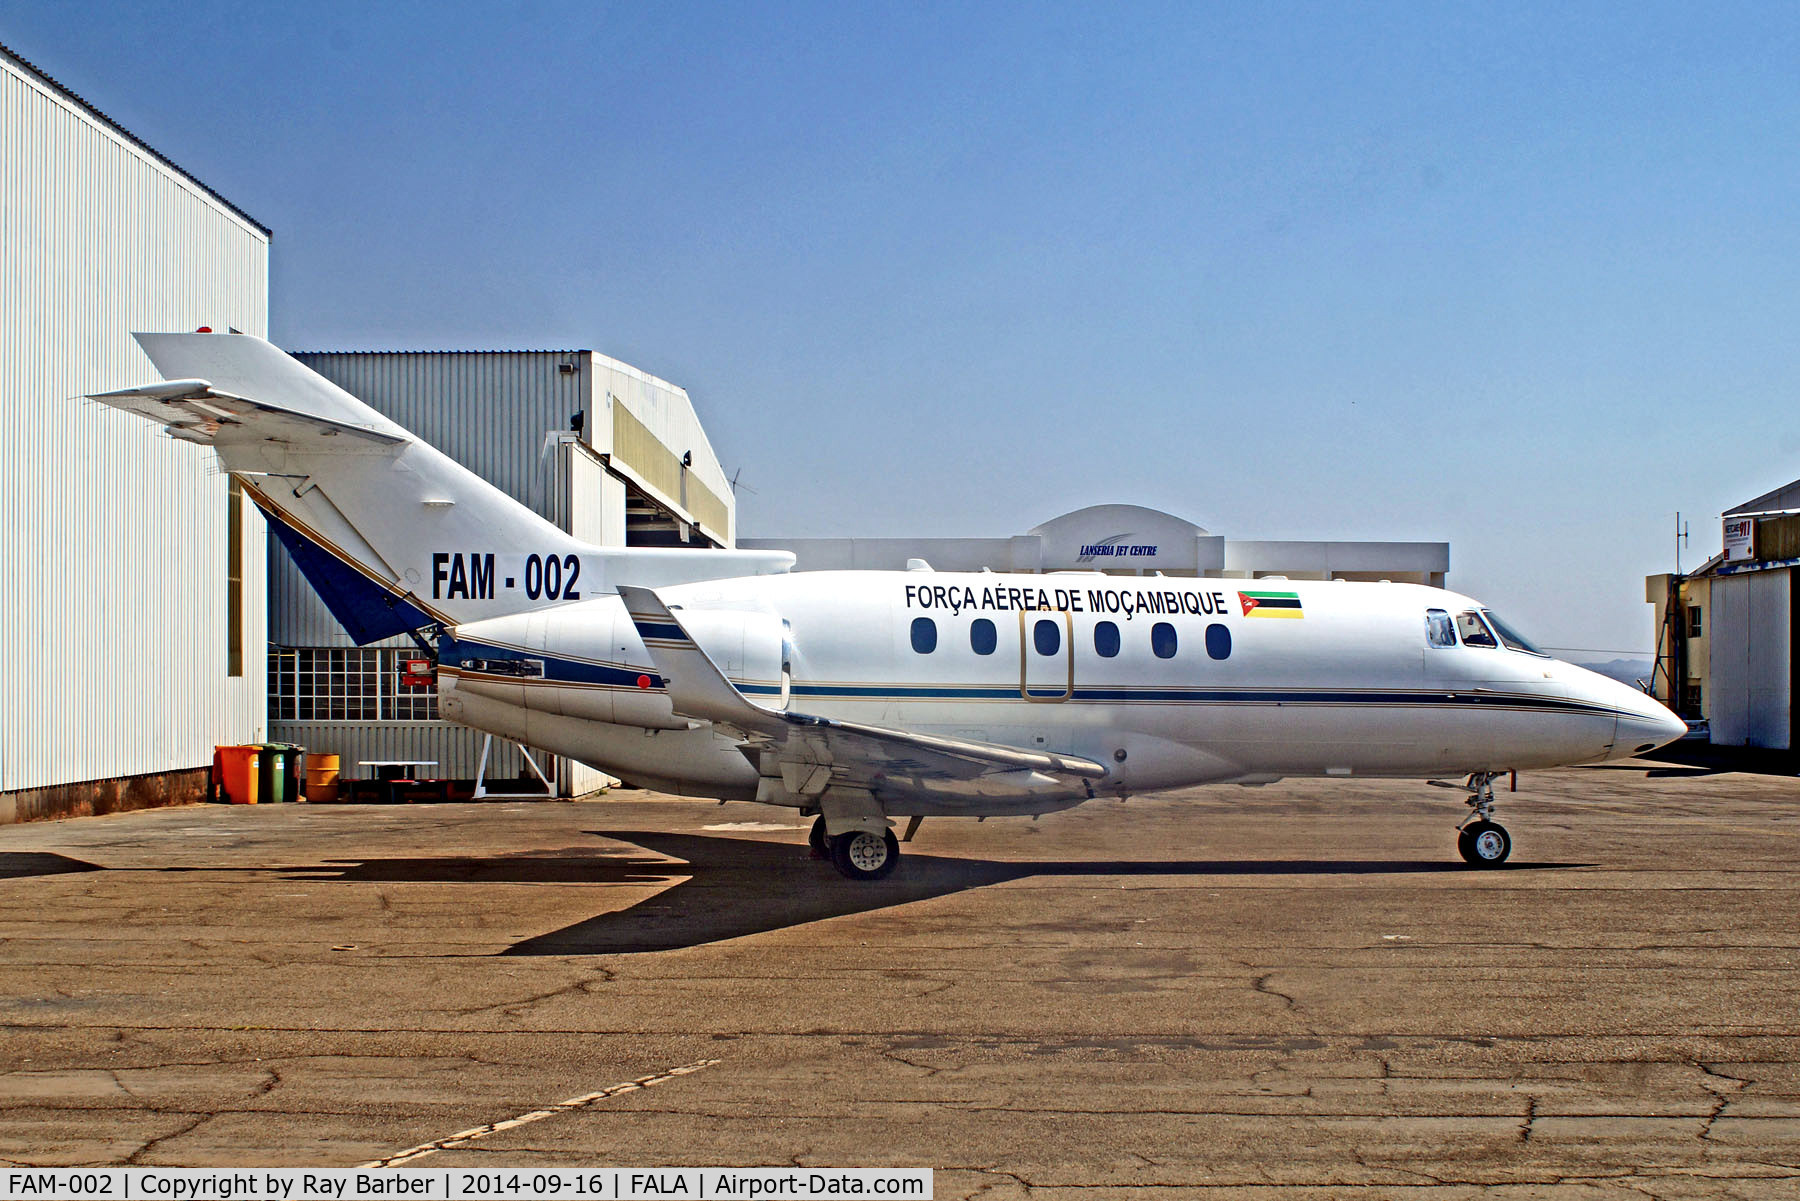 FAM-002, 2005 Raytheon Hawker 850XP C/N 258750, FAM-002   Hawker-Siddeley HS.125/850XP [258750] (Mozambique Air Force) Lanseria~ZS 16/09/2014